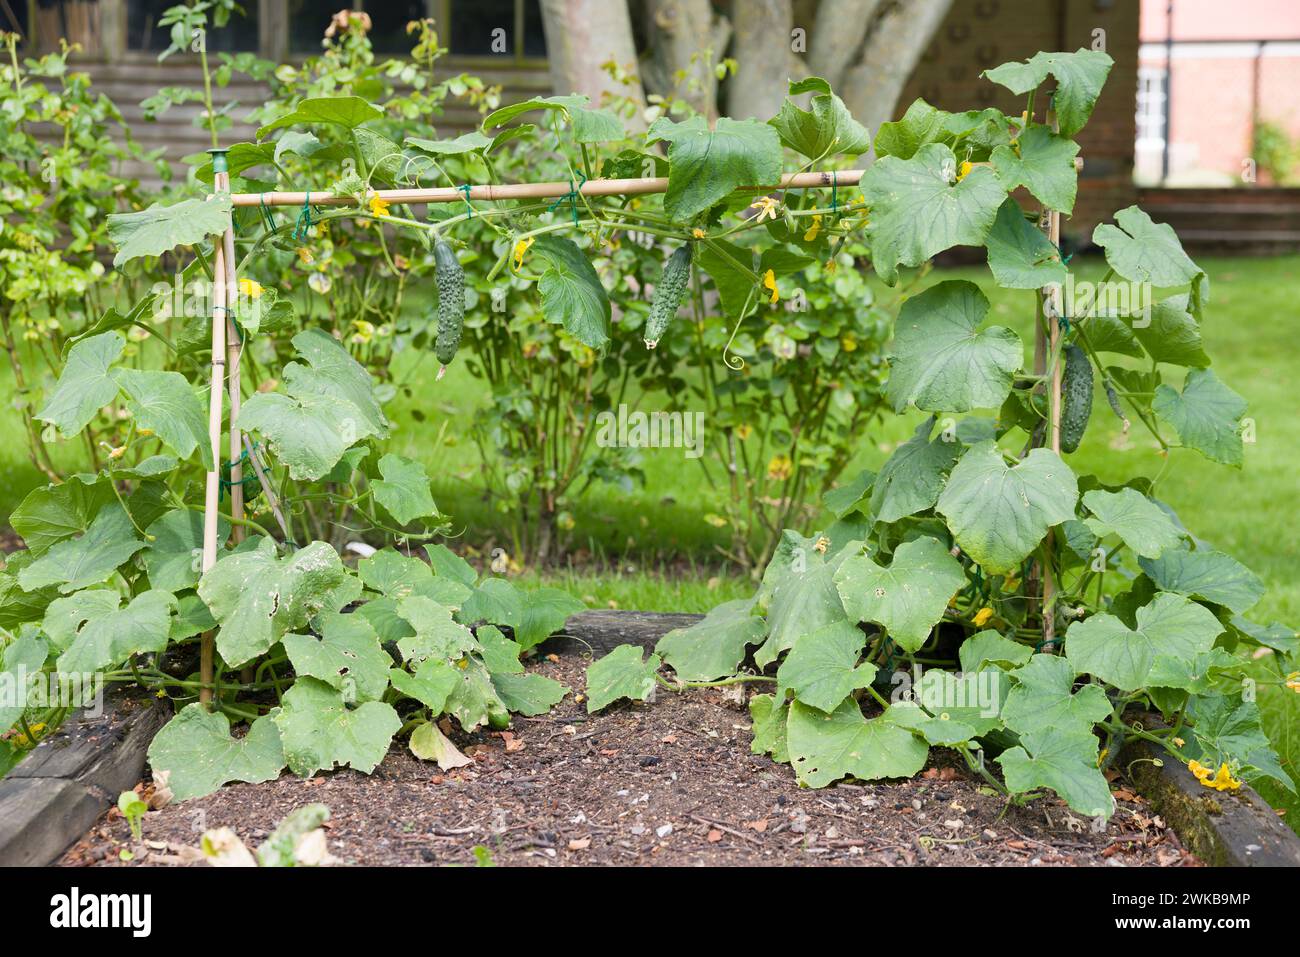 Cucumber plants (Bedfordshire Prize ridged cucumbers) growing outside in an English vegetable garden in summer, UK Stock Photo